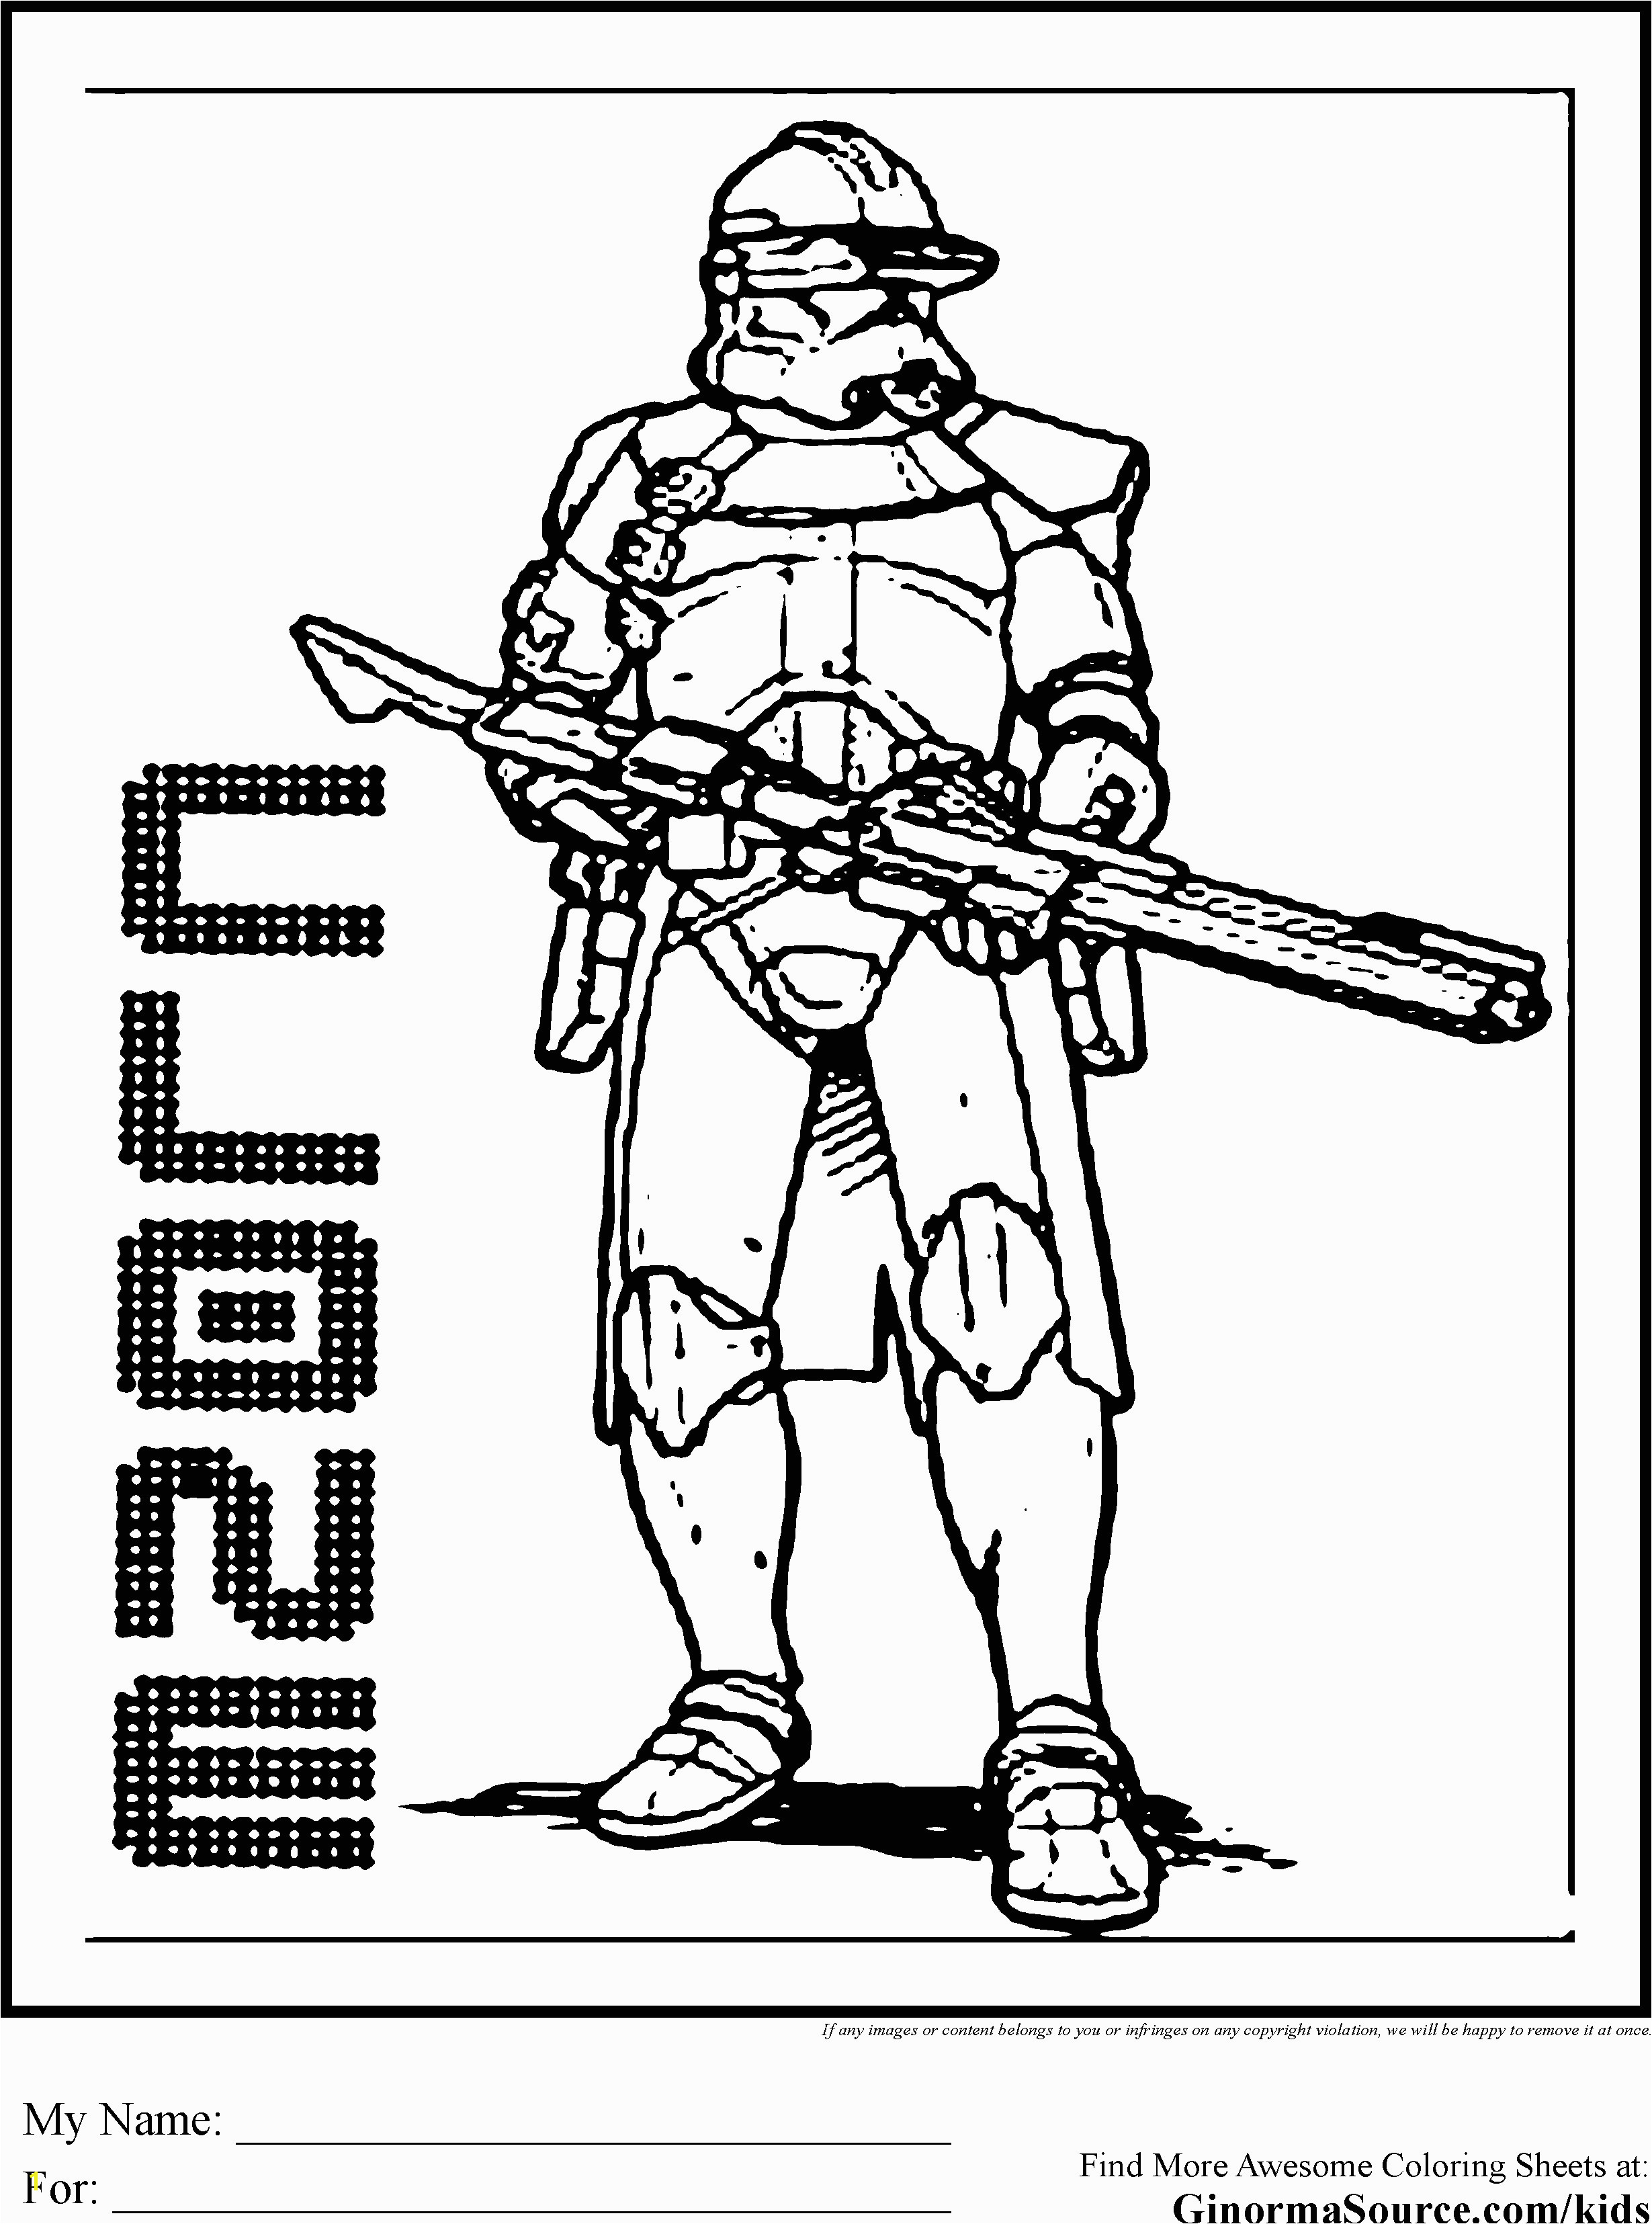 Star Wars Clone Wars Coloring Pages Star Wars Coloring Pages for Adults Coloring Pages Coloring Pages